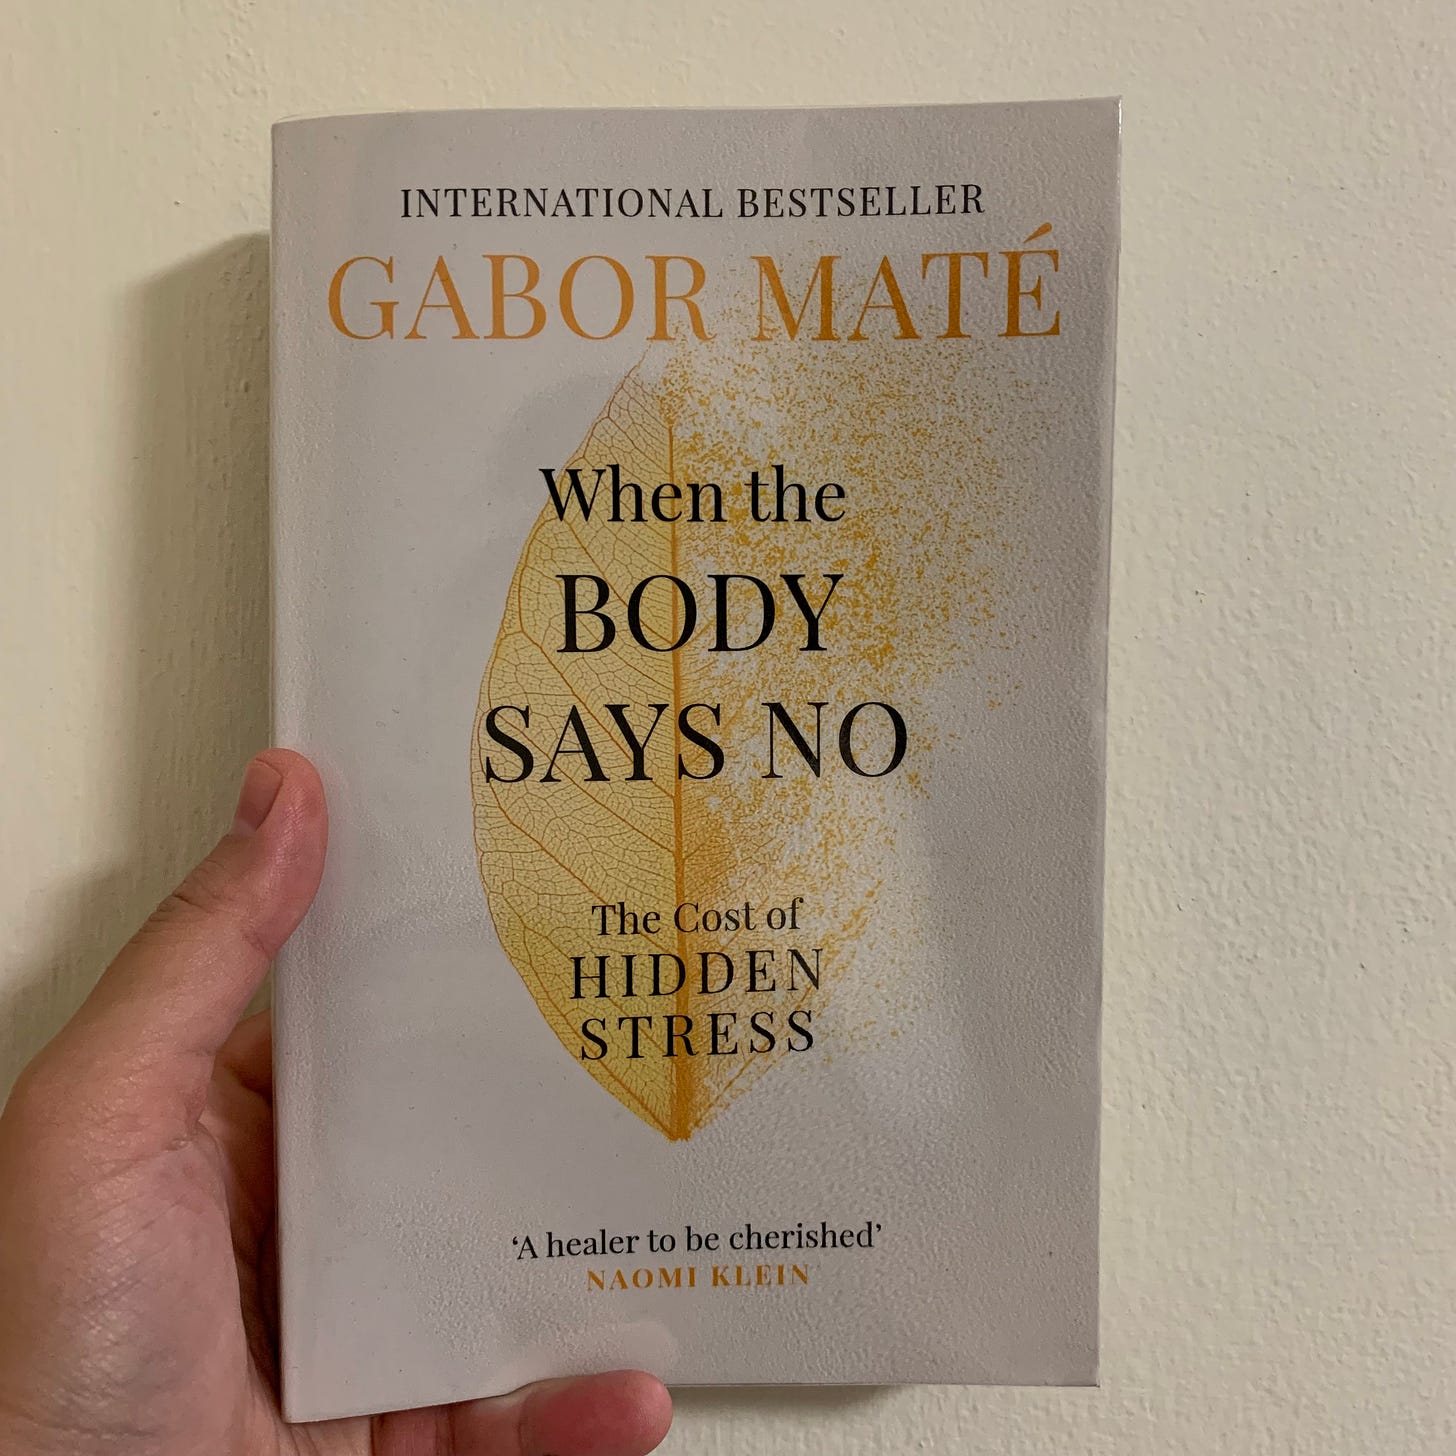 Picture of a left hand holding a book titled "When the body says no: The cost of hidden stress" by Gabor Maté